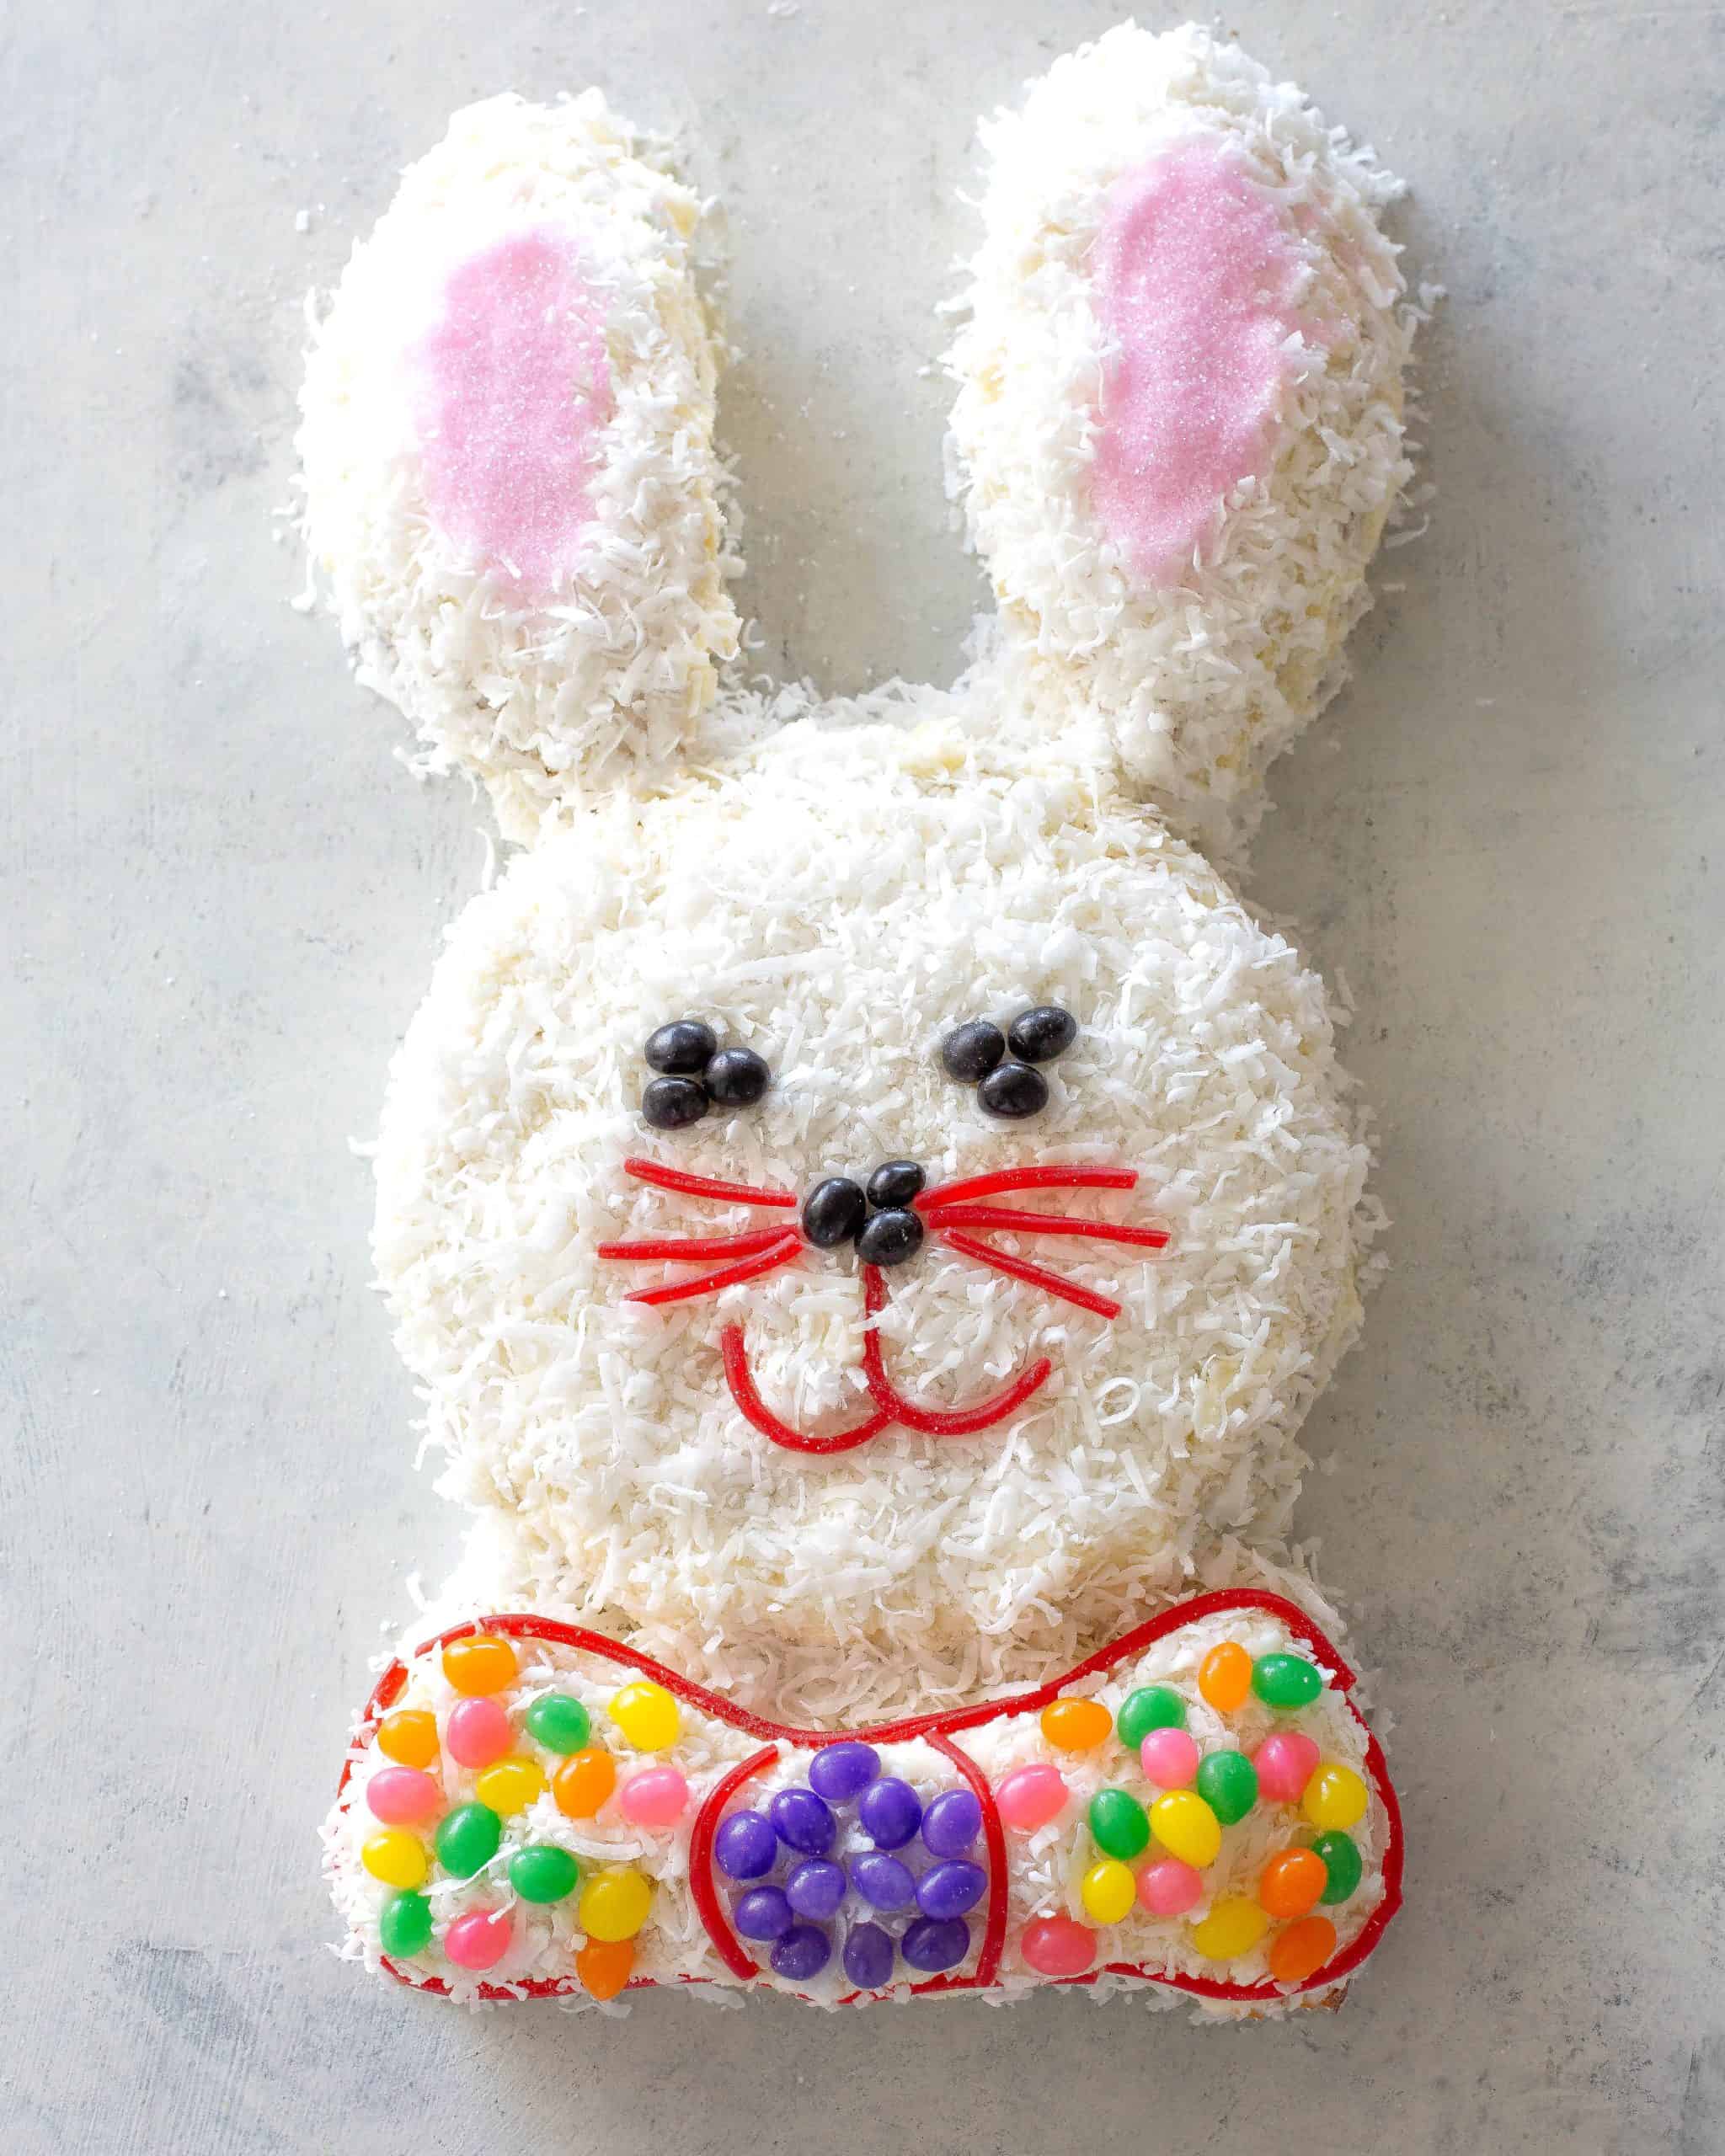 EASIEST Easter Bunny Cake Recipe - Simple and Festive!!